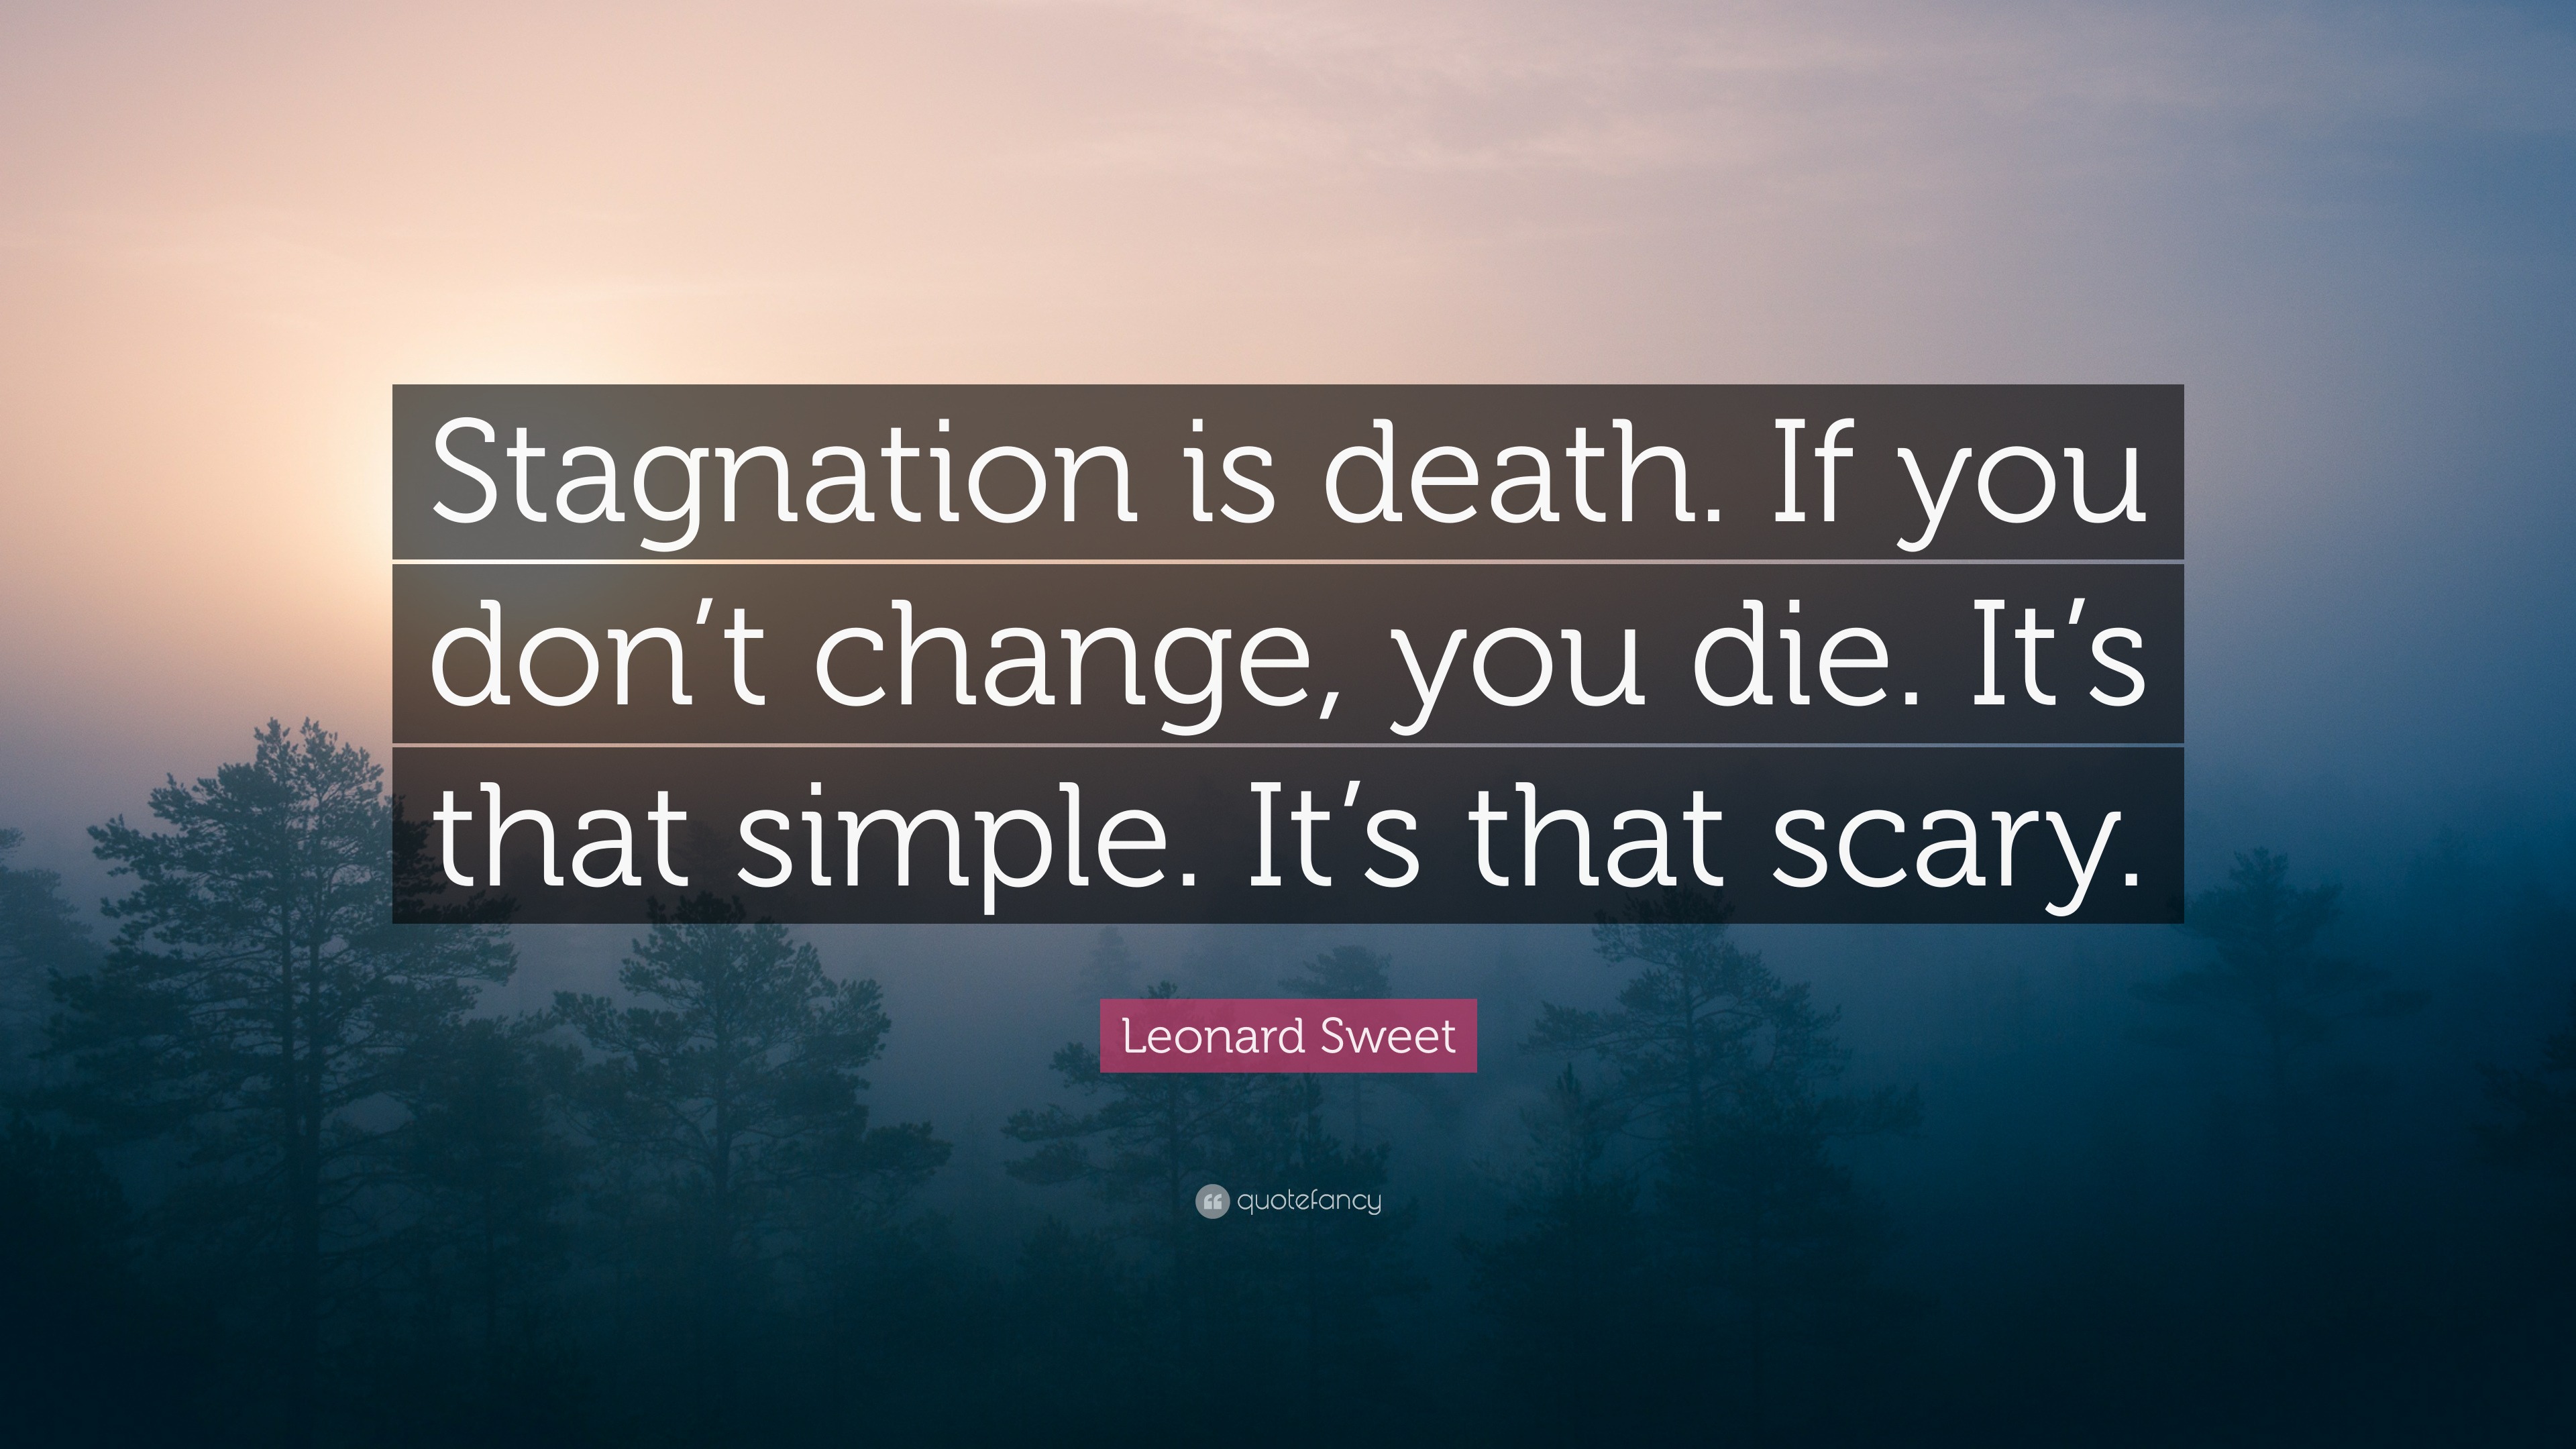 Leonard Sweet Quote Stagnation Is Death If You Don T Change You Die It S That Simple